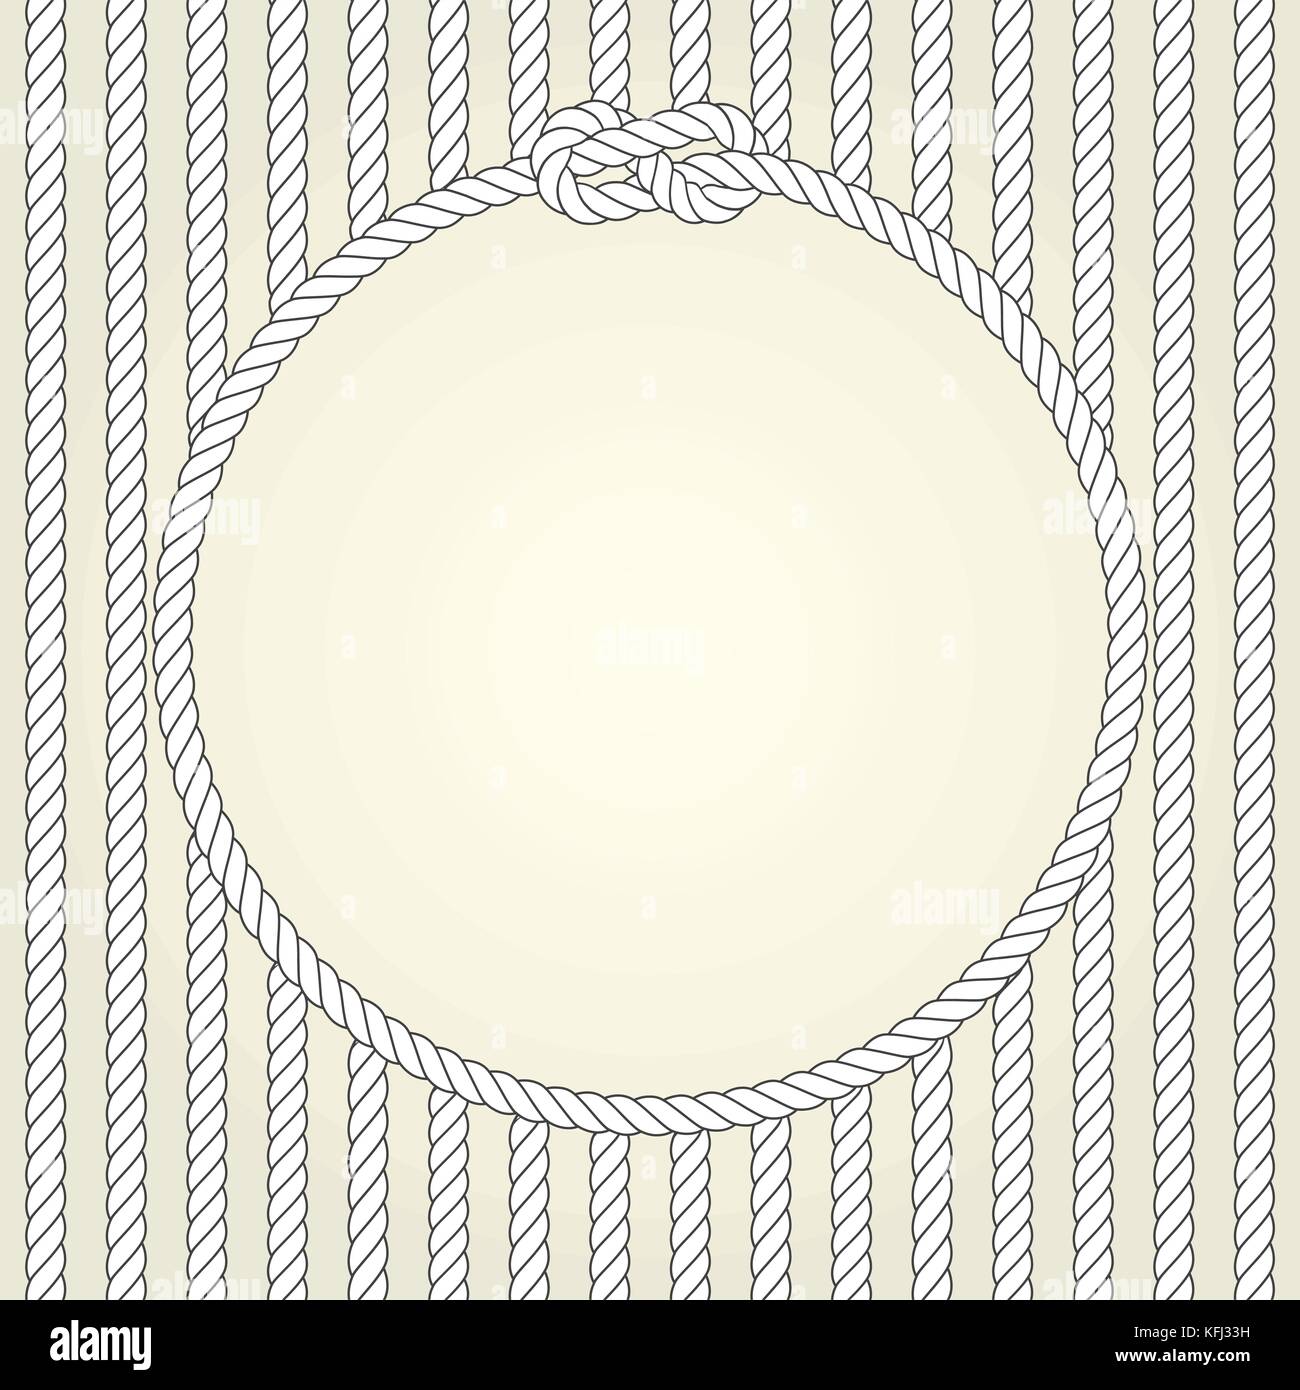 Round rope frame in naval theme Stock Vector